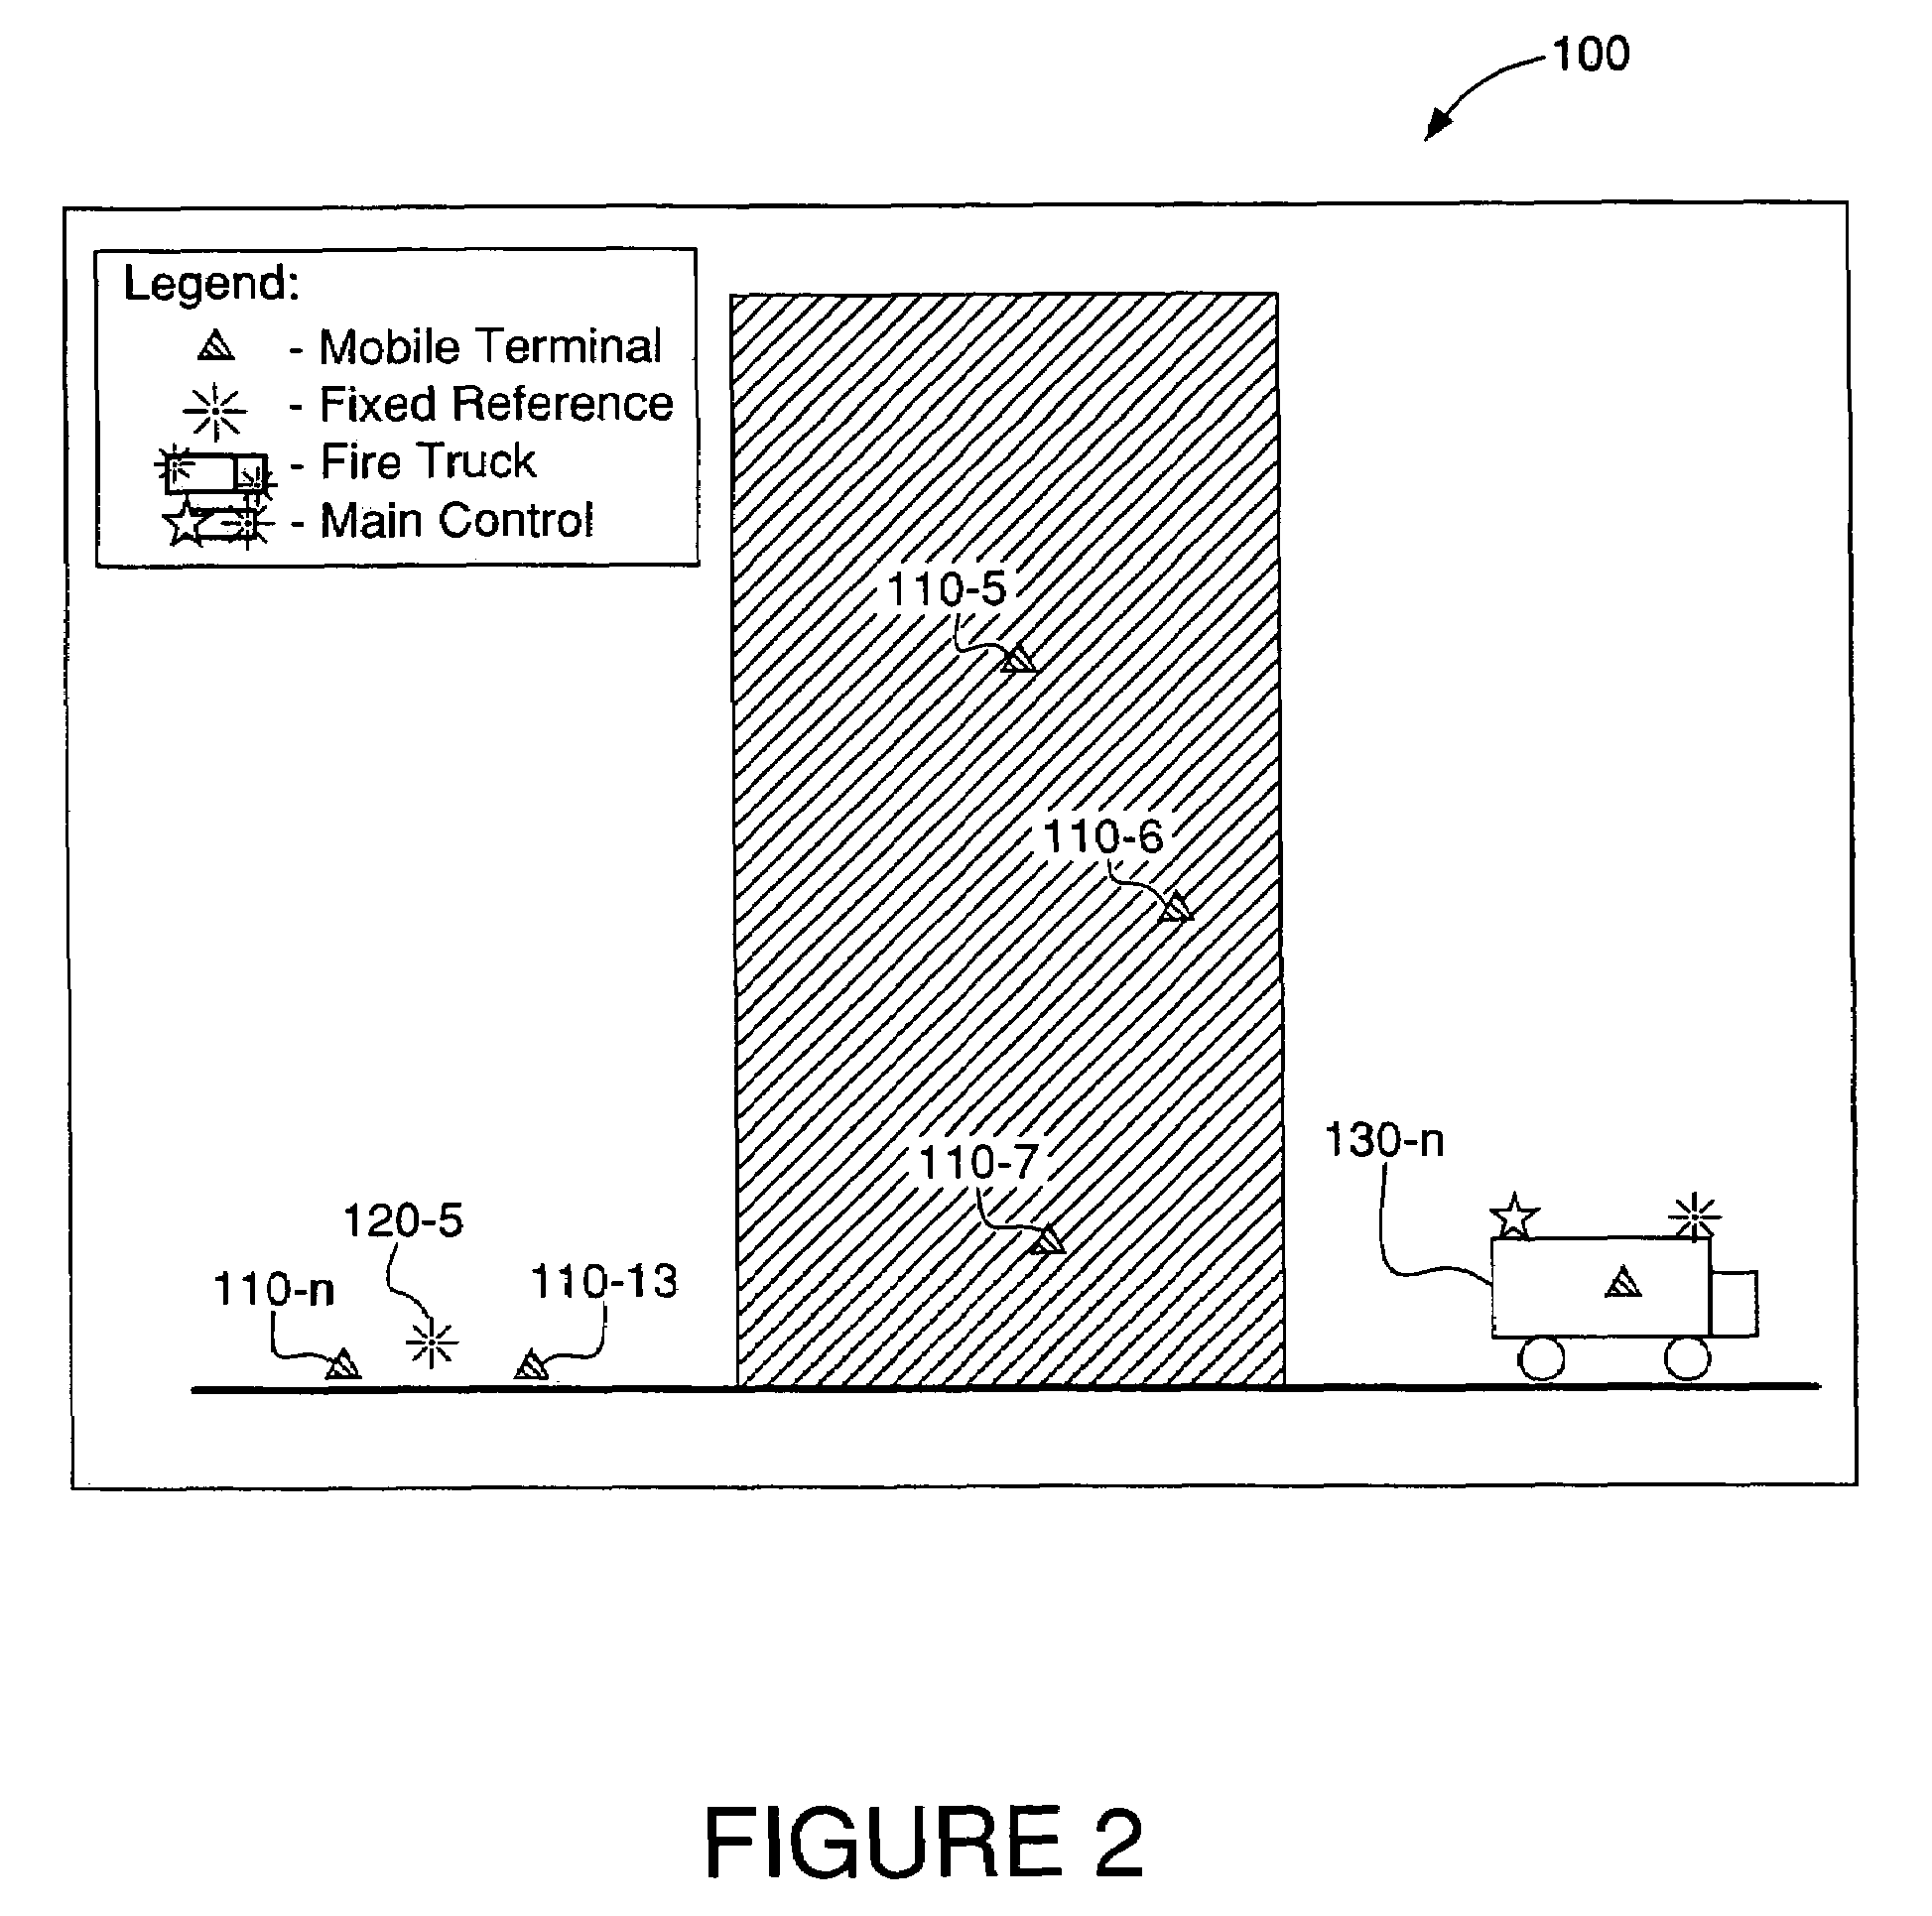 System and method for accurately computing the position of wireless devices inside high-rise buildings